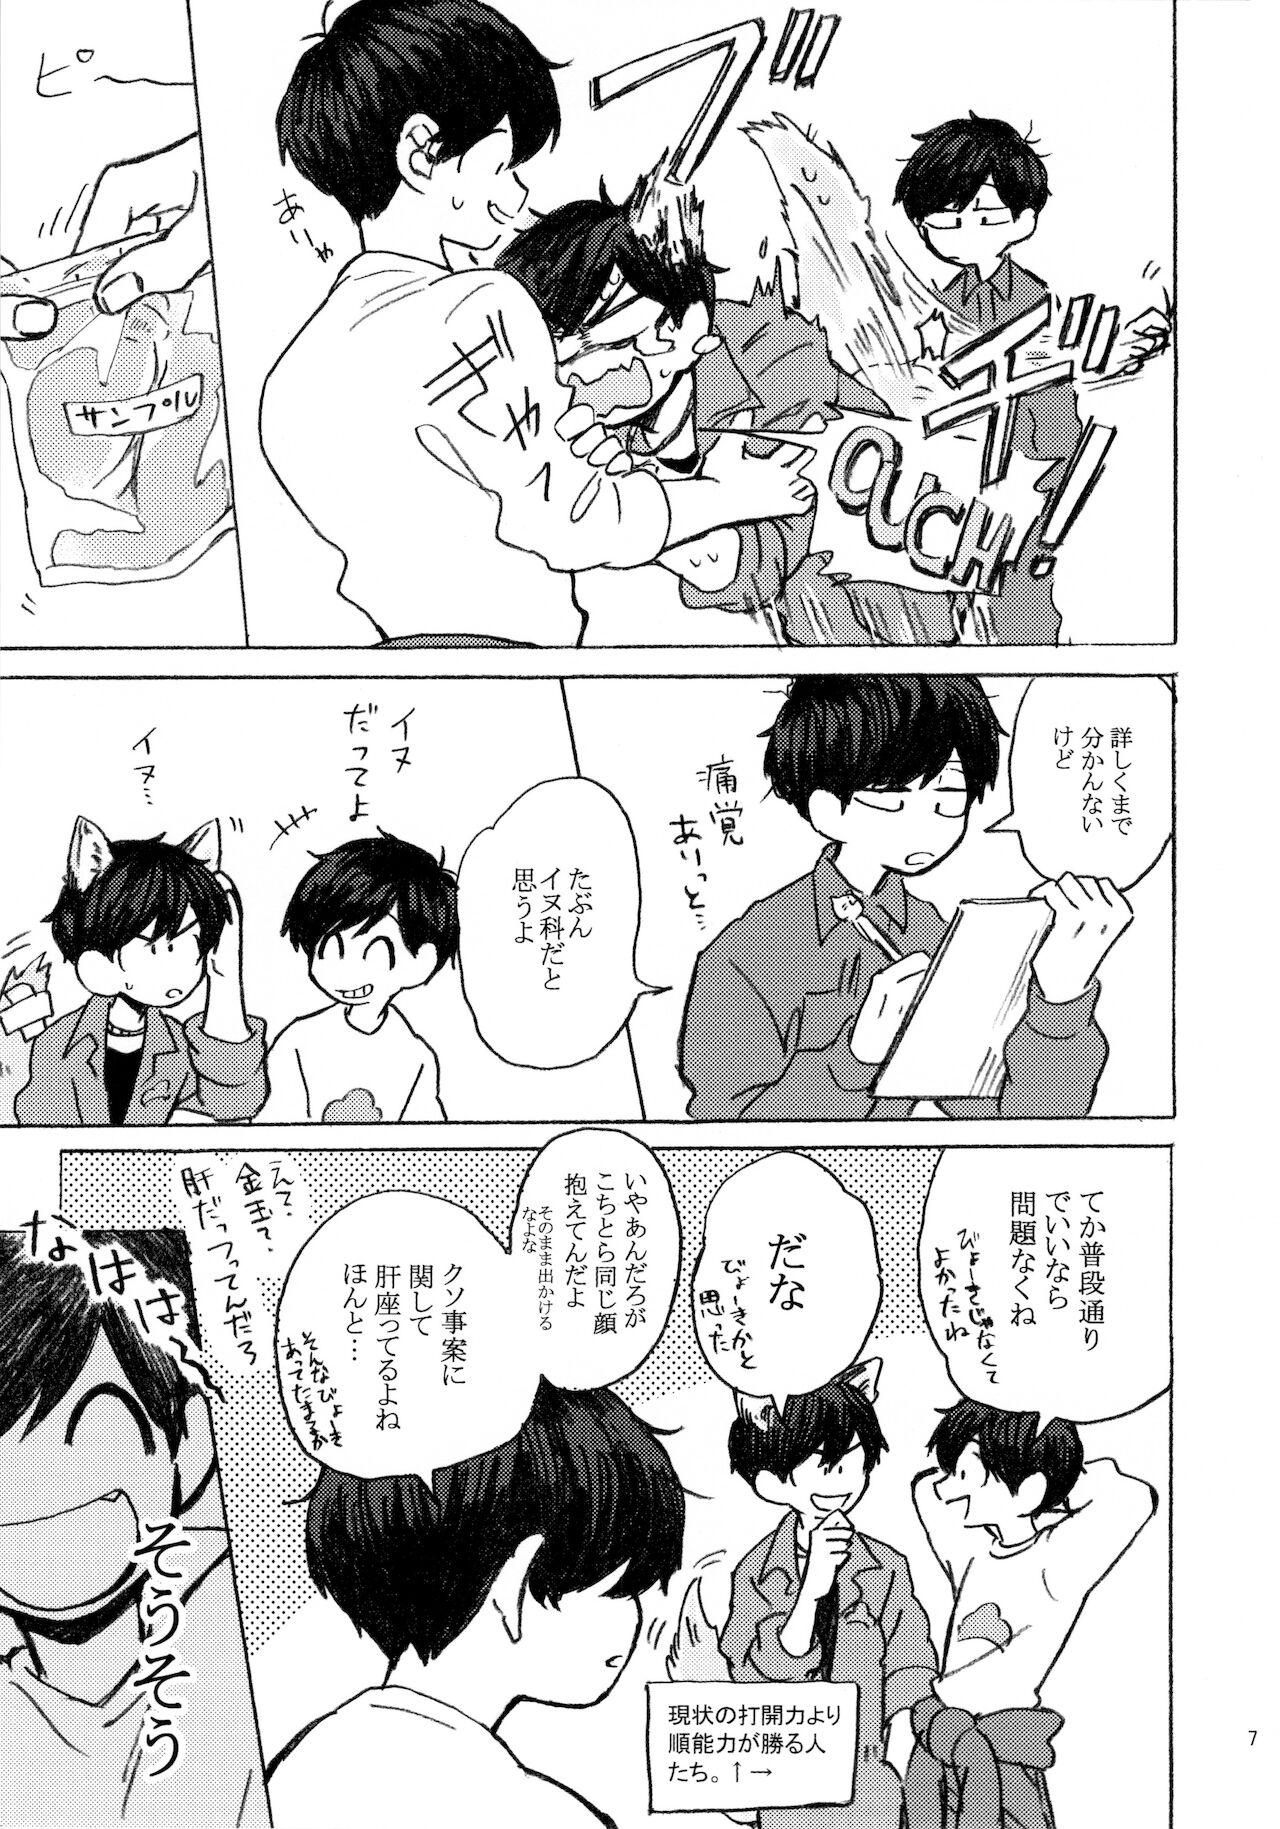 Load PLEASE WAG YOUR TAIL ONLY TO ME. - Osomatsu-san Family Roleplay - Page 8